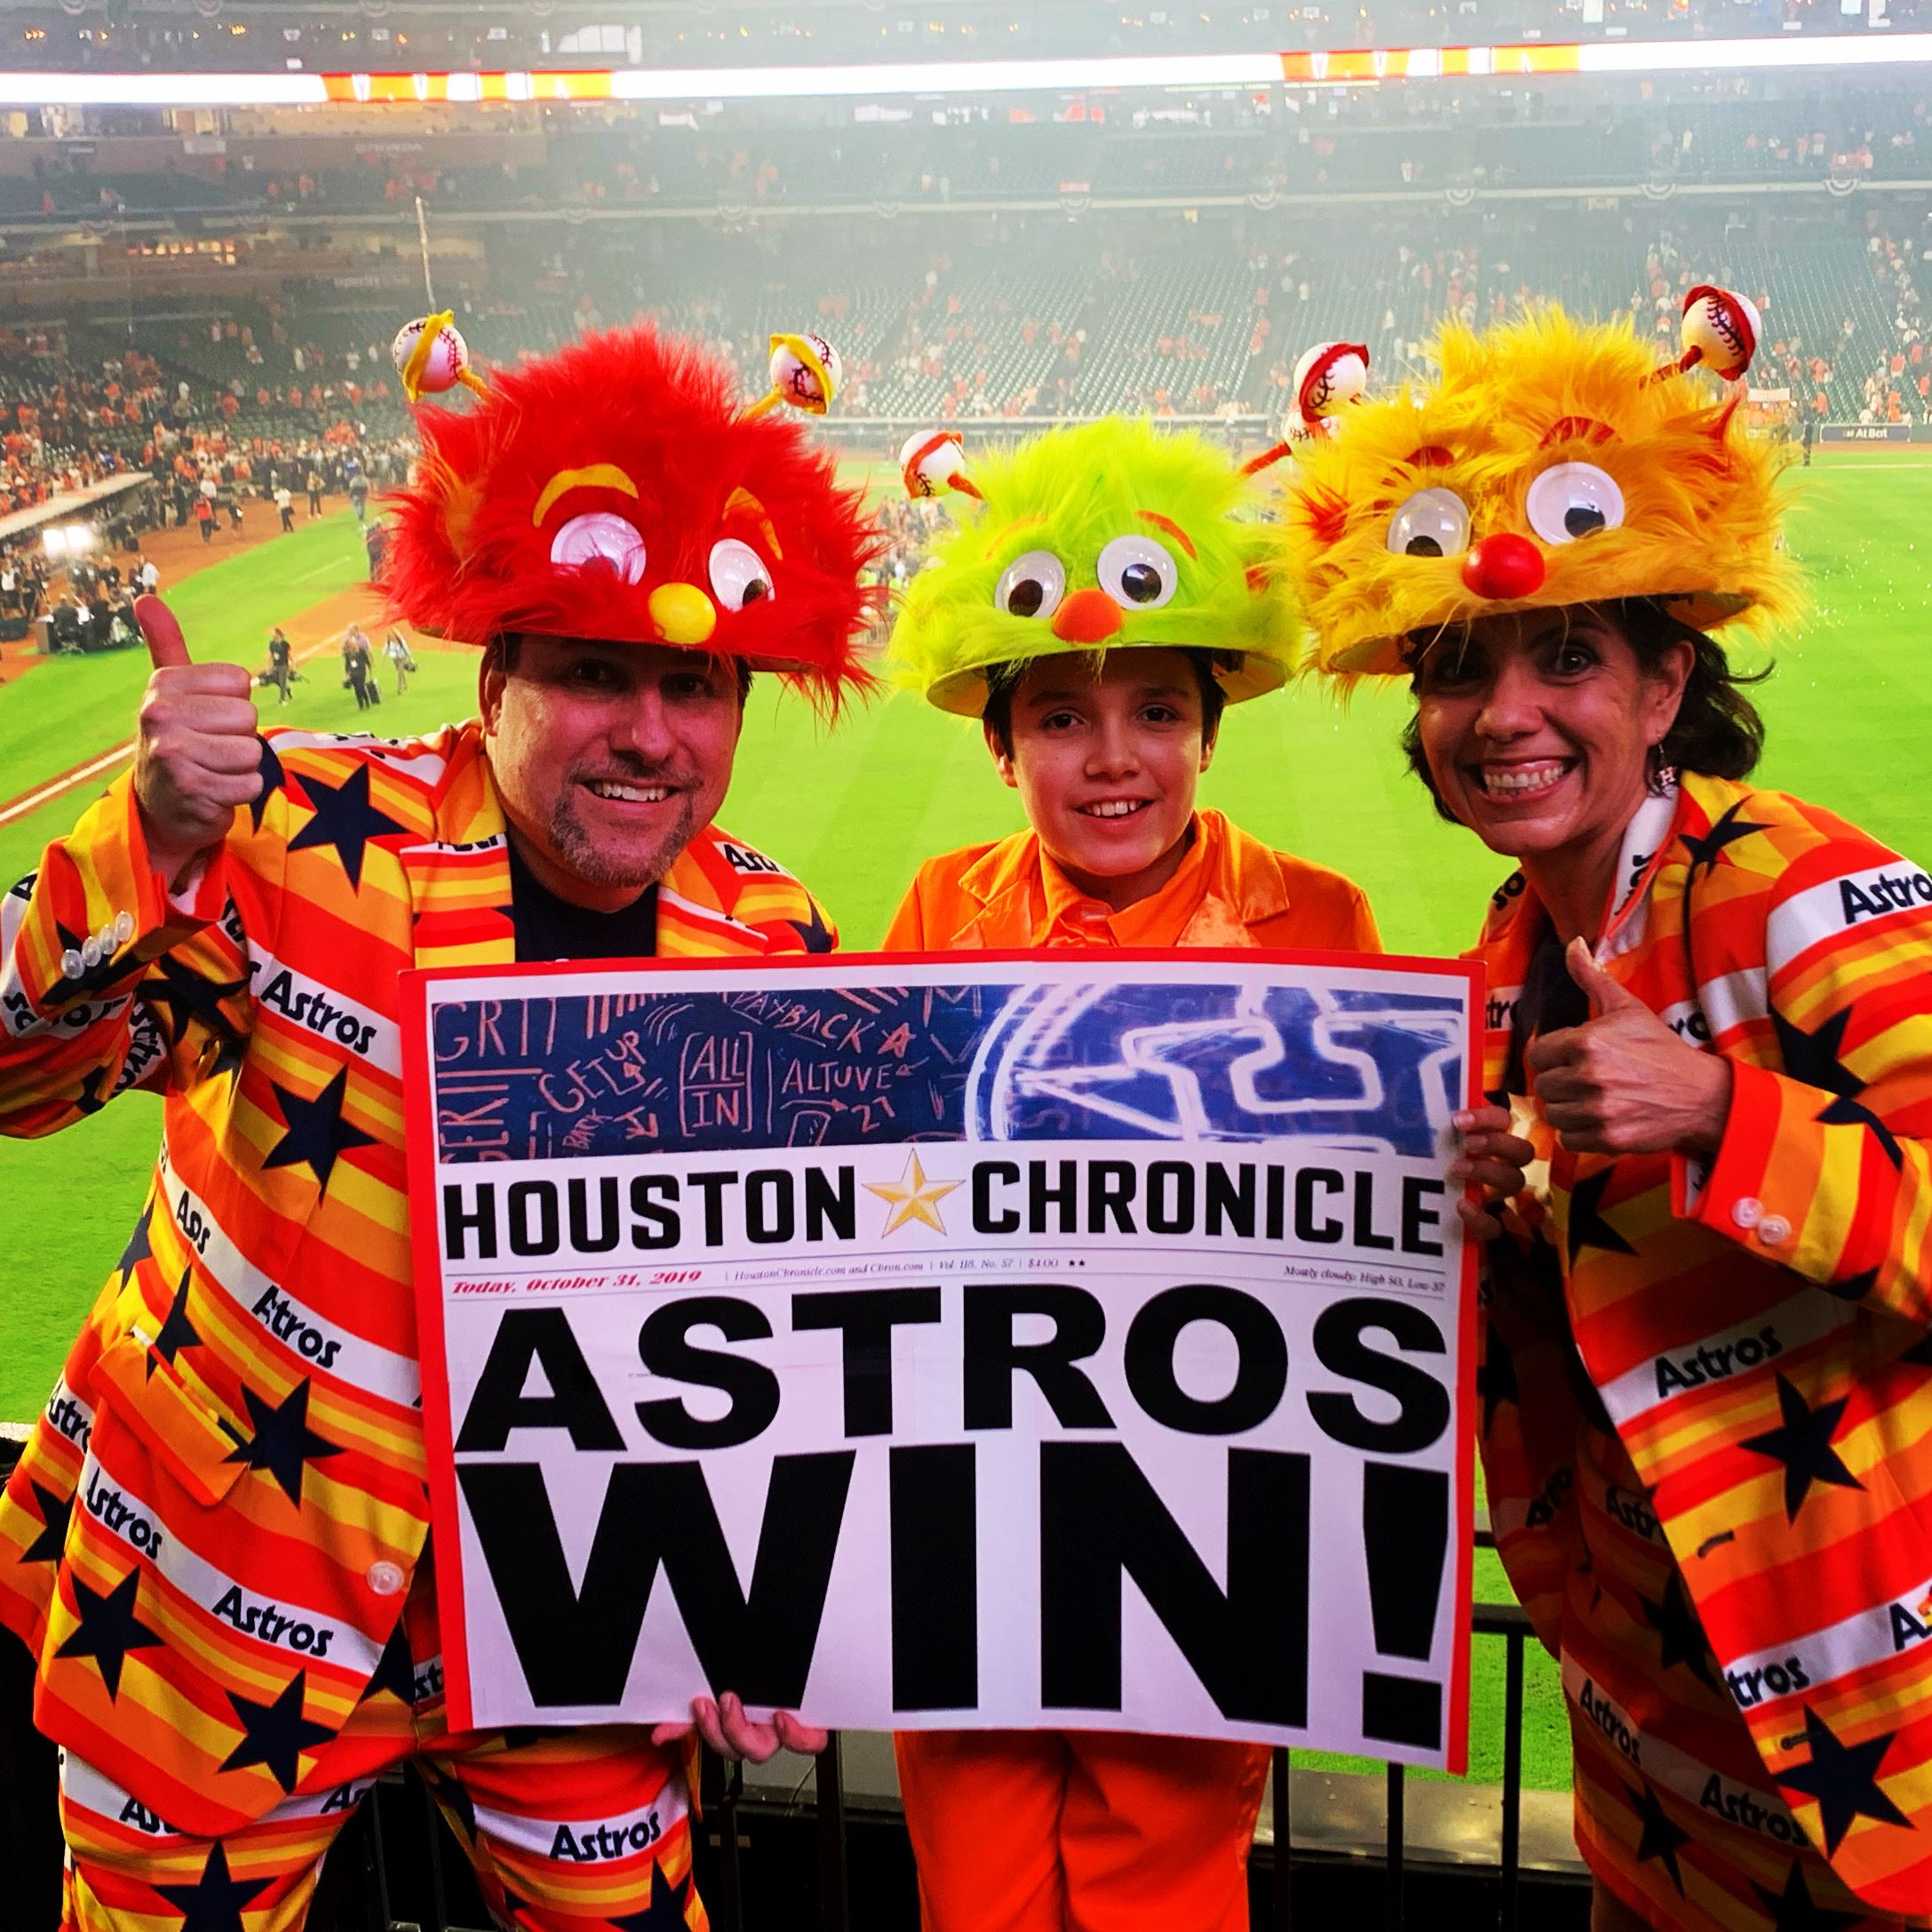 Astros Win with the Astros Woo Crew - Awesome Astros Gear: Share your  favorite Astros outfit